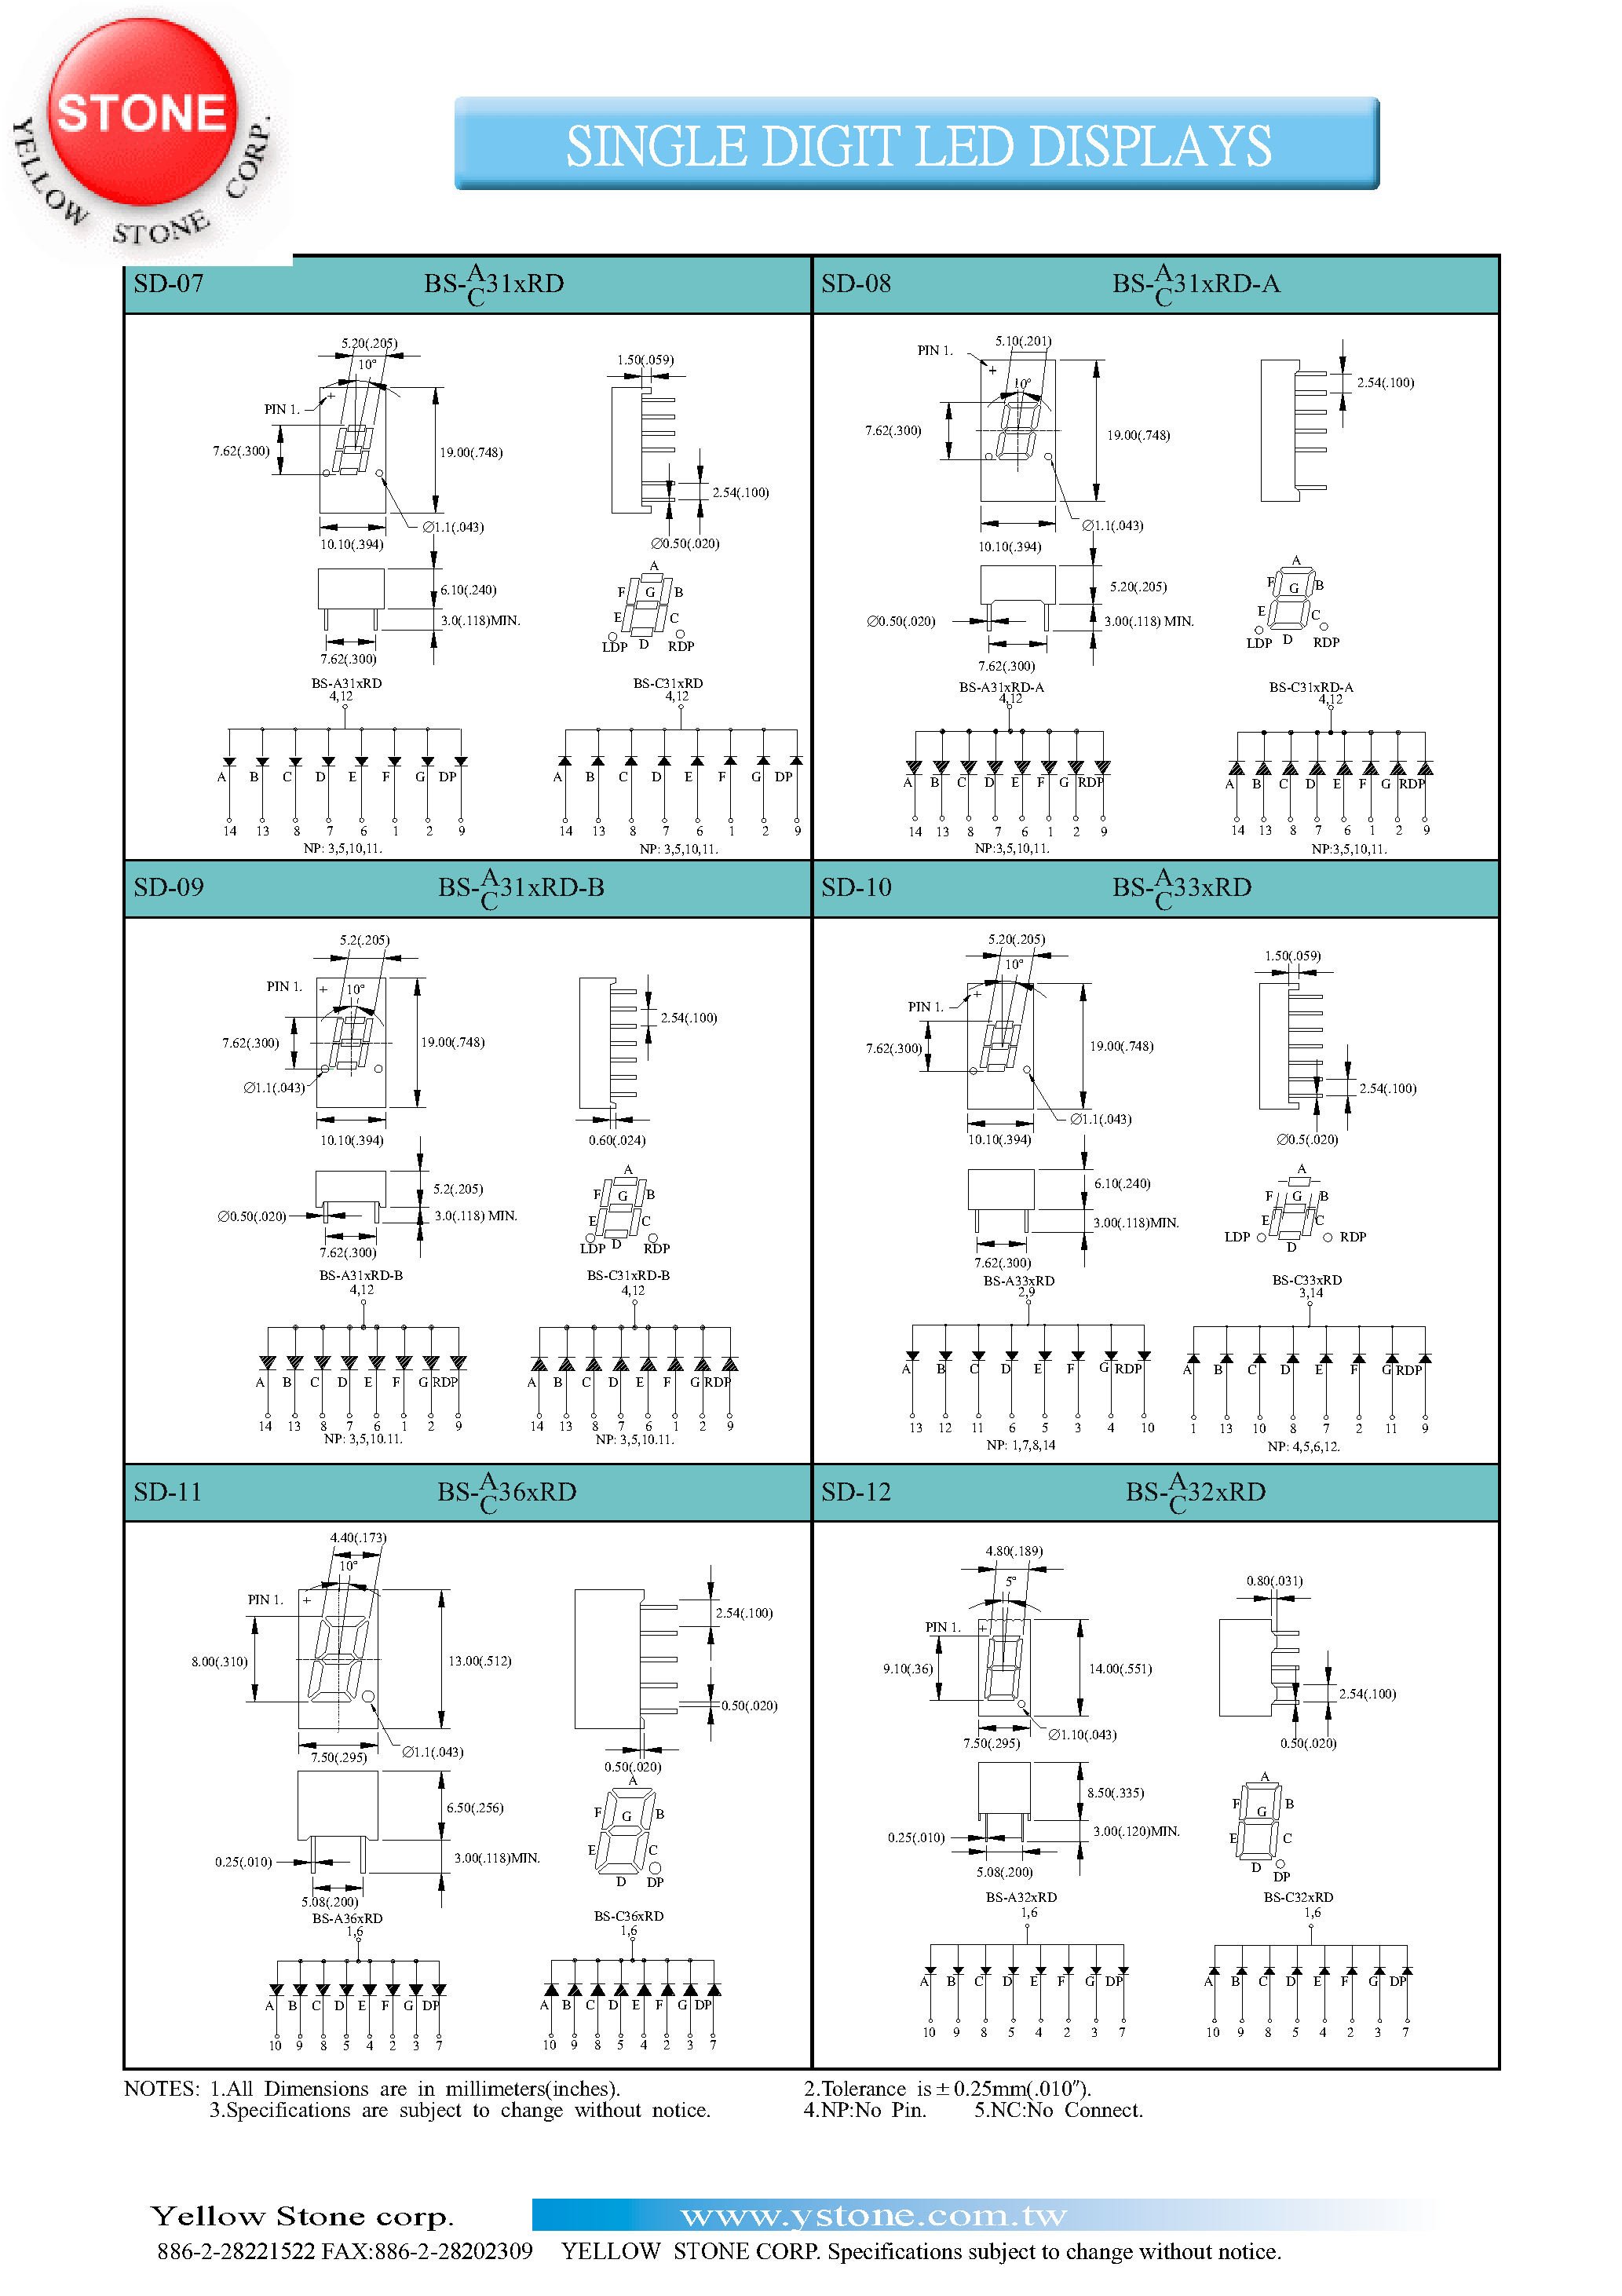 Datasheet BS-A312RD-B - SINGLE DIGIT LED DISPLAYS page 2